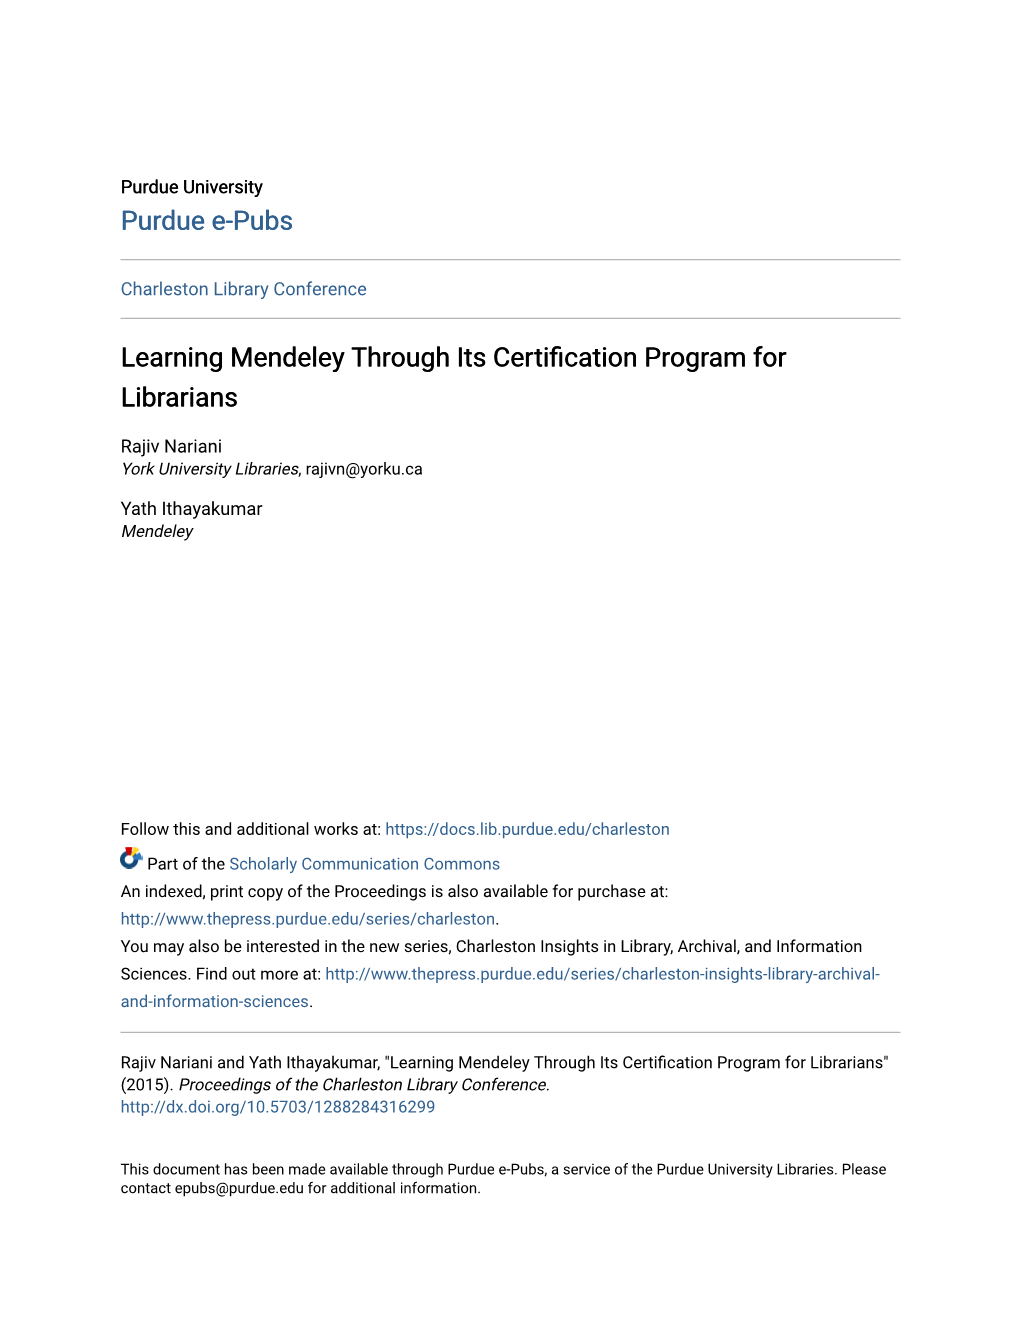 Learning Mendeley Through Its Certification Program for Librarians